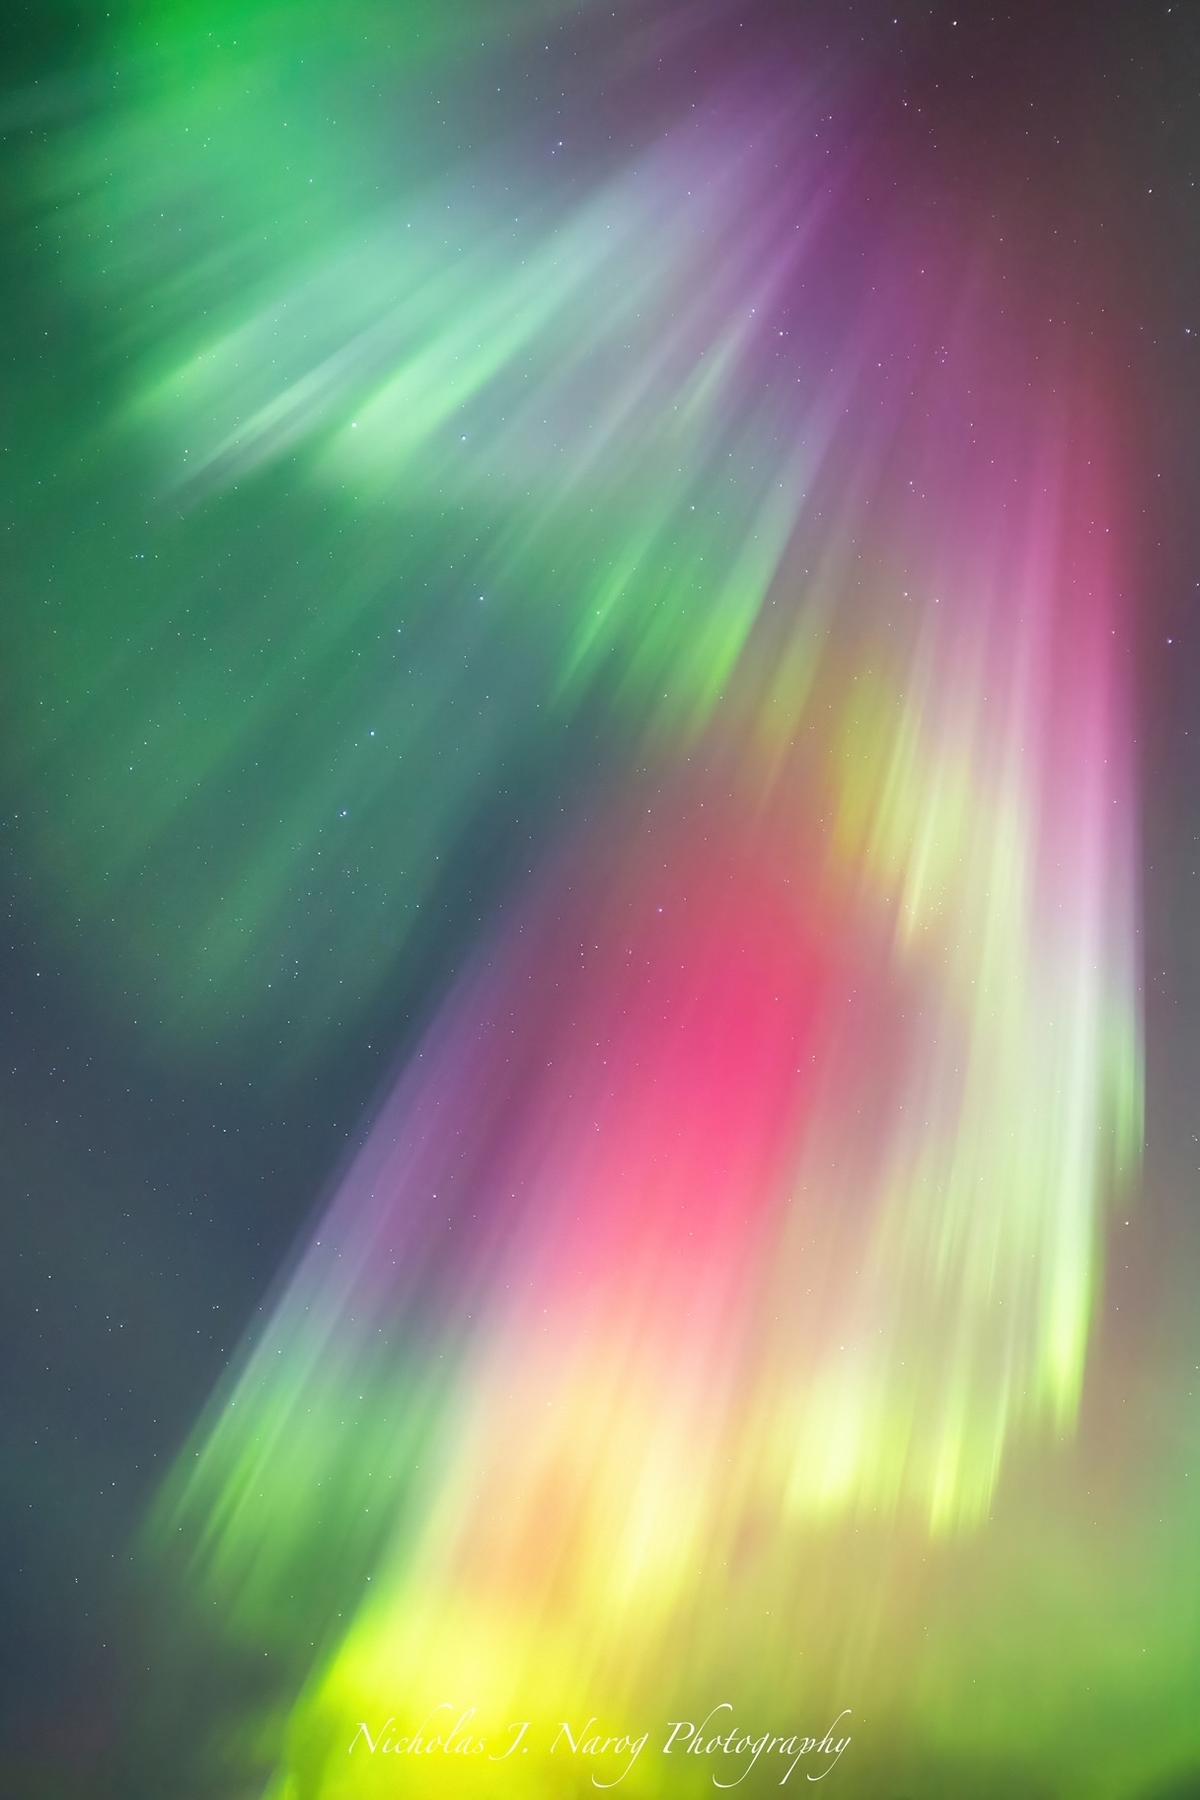 Breathtaking northern lights photographed by Nicholas Narog. (Courtesy of <a href="https://www.instagram.com/nicholas_j._narog_photography/">Nicholas J. Narog Photography</a>)